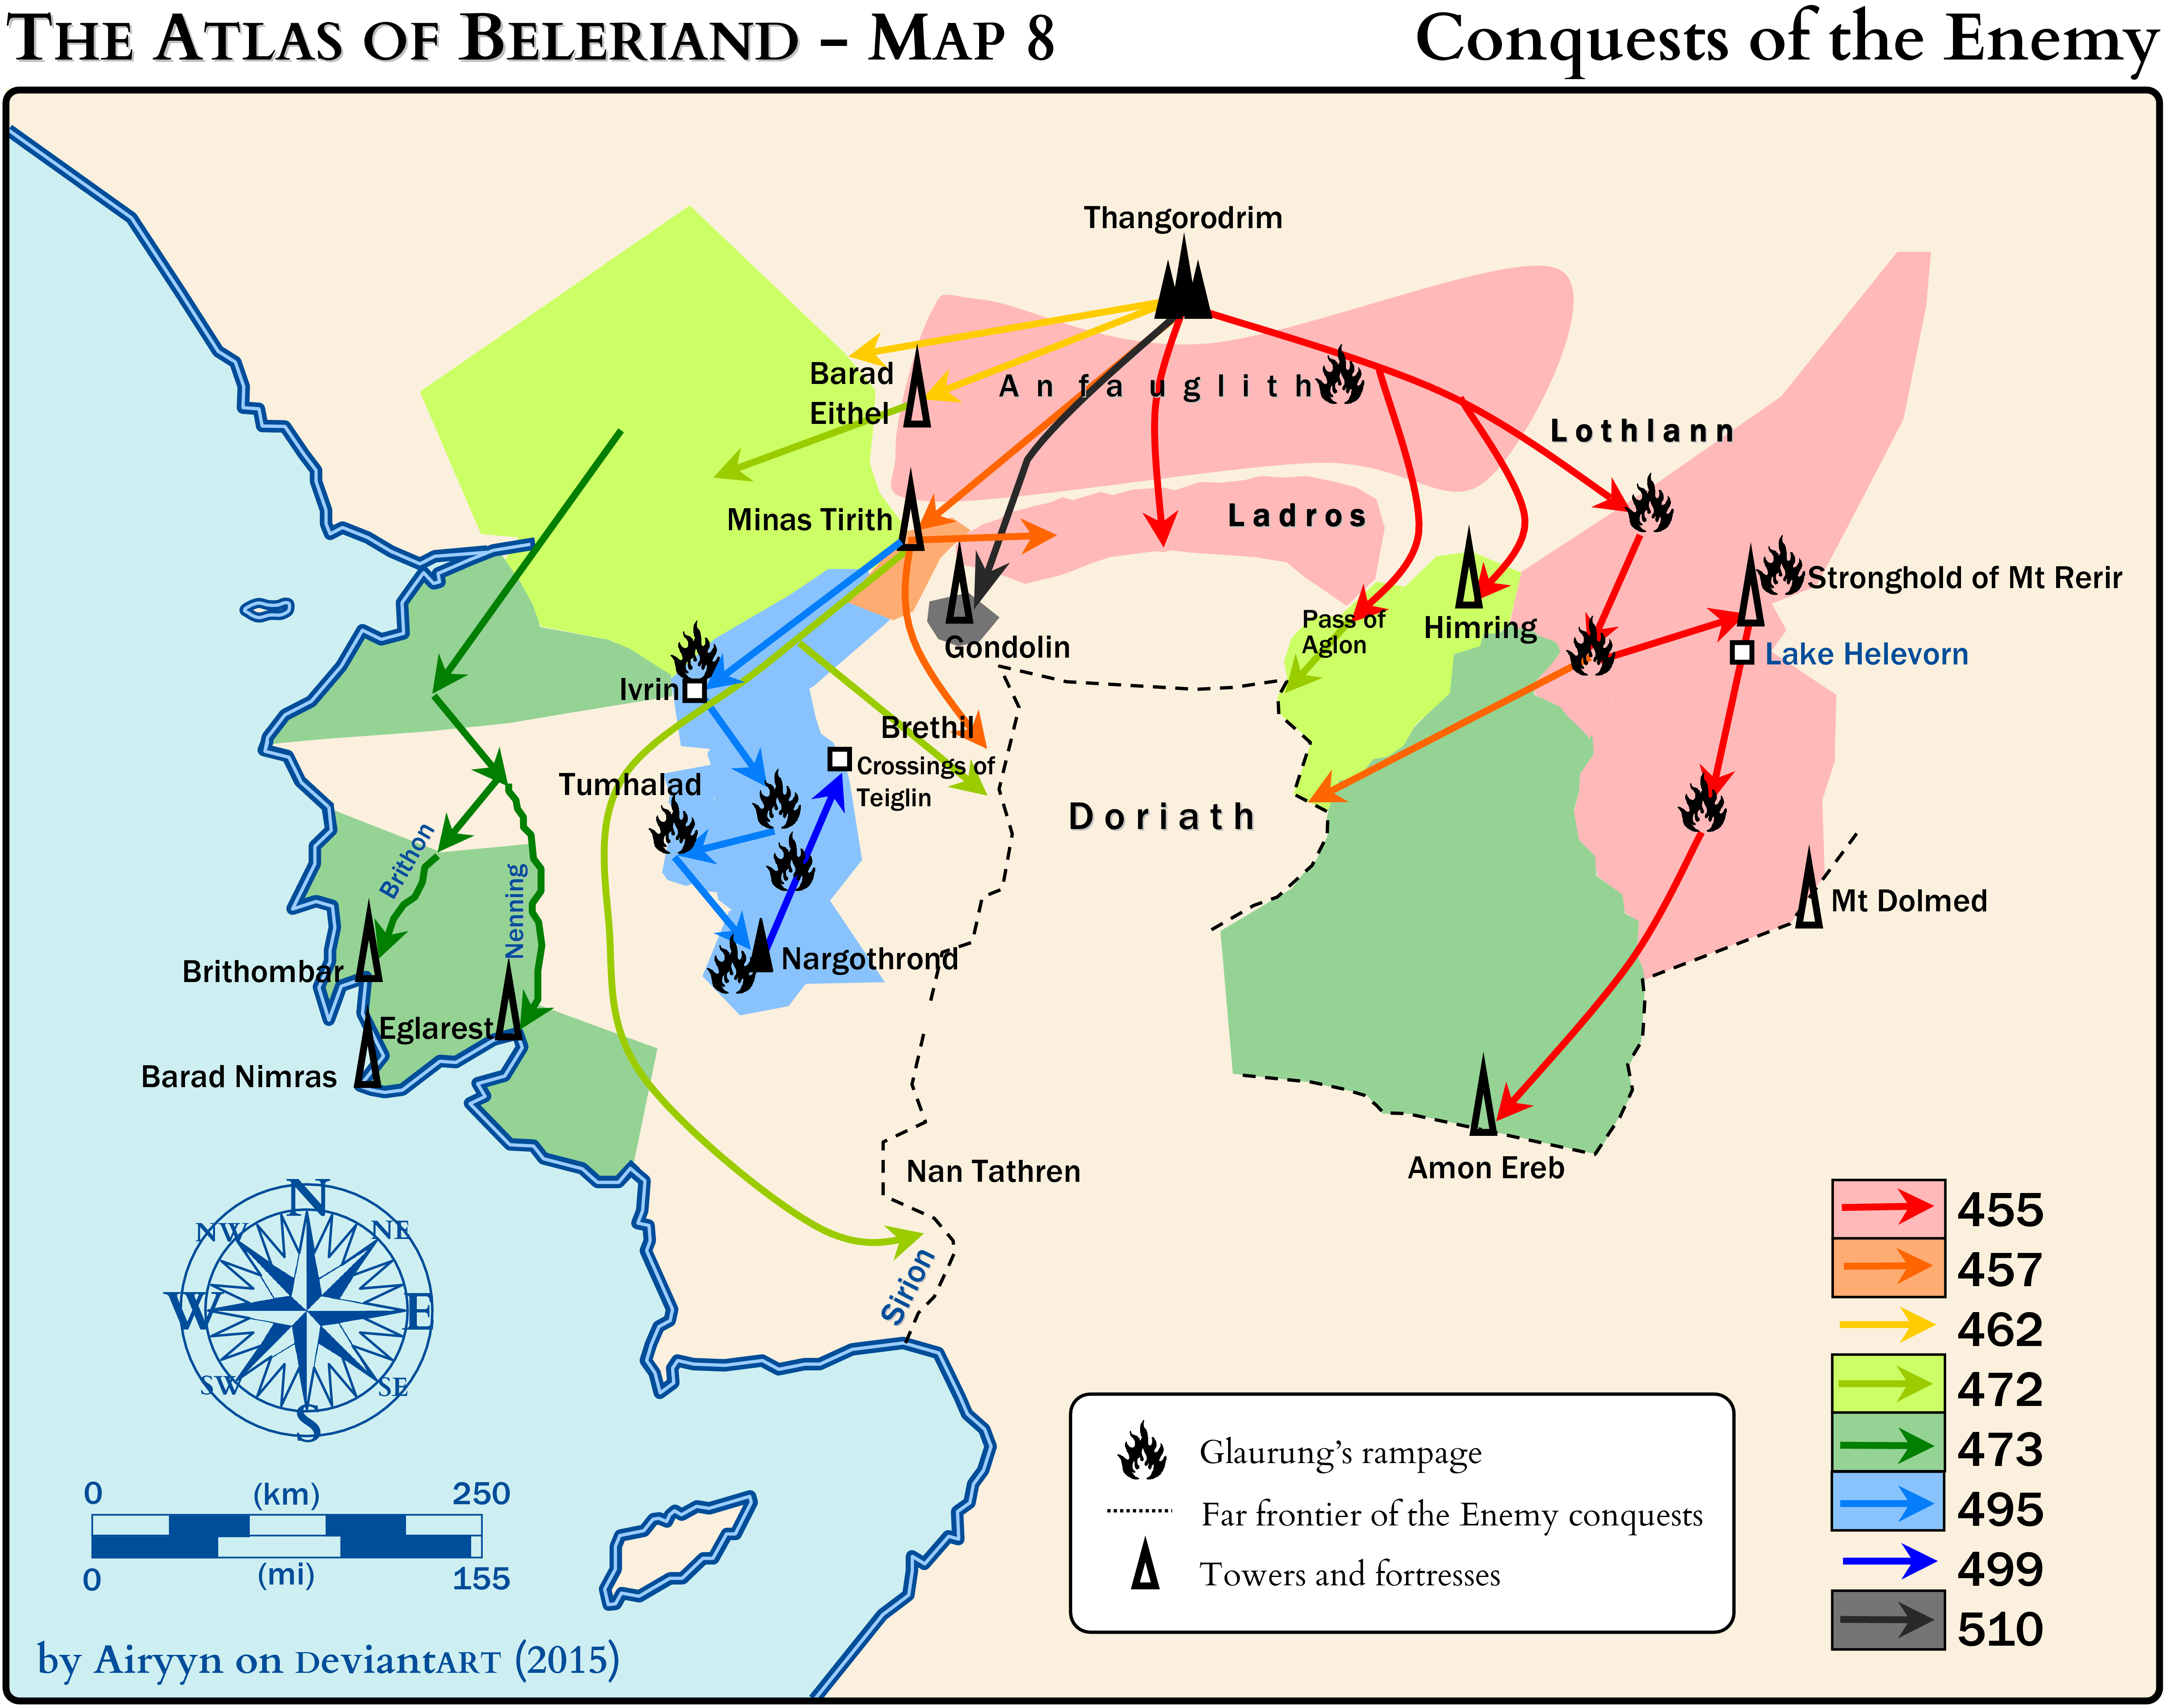 The Atlas of Bleriand: Conquests of the Enemy